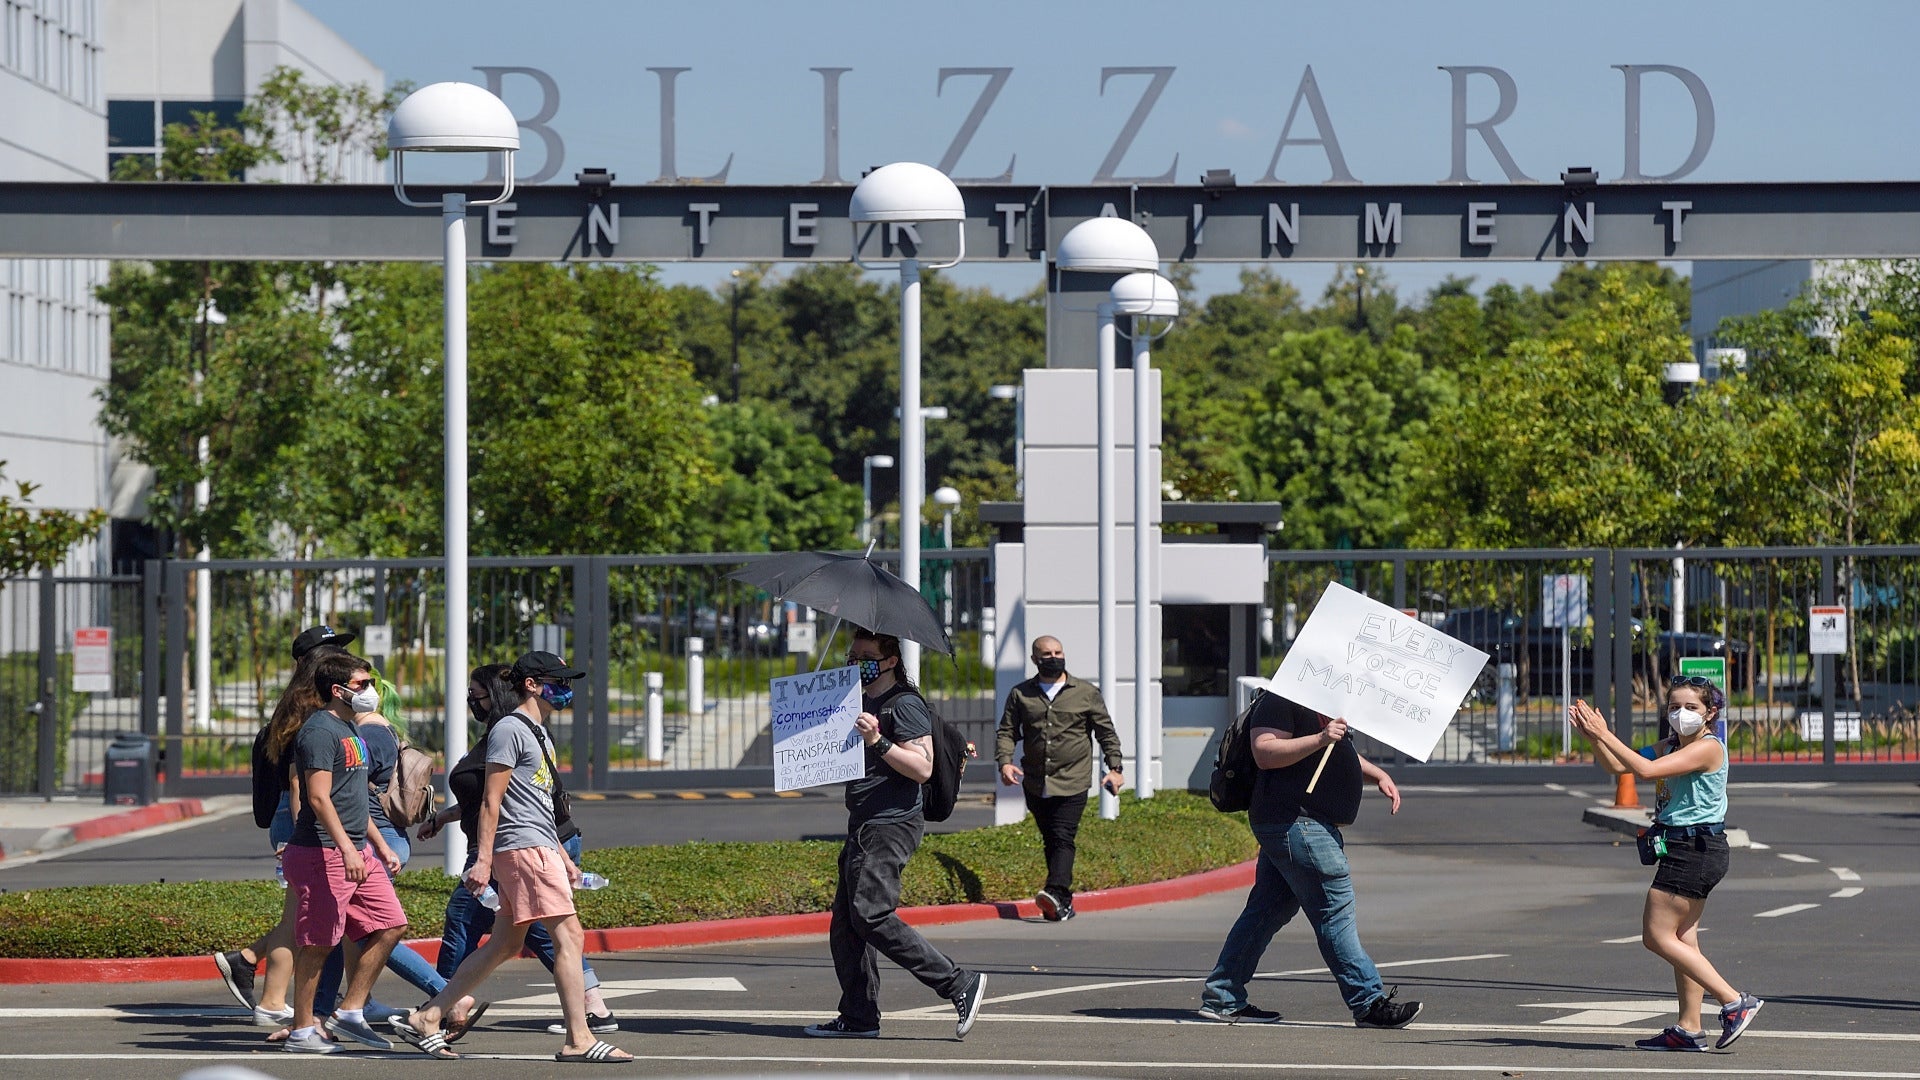 <b>August 3, 2021 - Activision Blizzard Employees Form Coalition, Reject CEO's Choice of Law Firm</b></br></br> A coalition of workers from across multiple Activision Blizzard development studios have sent a joint letter to Activision Blizzard CEO Bobby Kotick and his executive leadership team that criticizes the company's decision to hire law firm WilmerHale.</br></br> This group, which is calling itself the ABK Workers Alliance, have expressed their frustrations over not just the hiring of the law firm that is currently working on helping Amazon prevent its employees from unionizing, but also over the fact that Kotick did not 